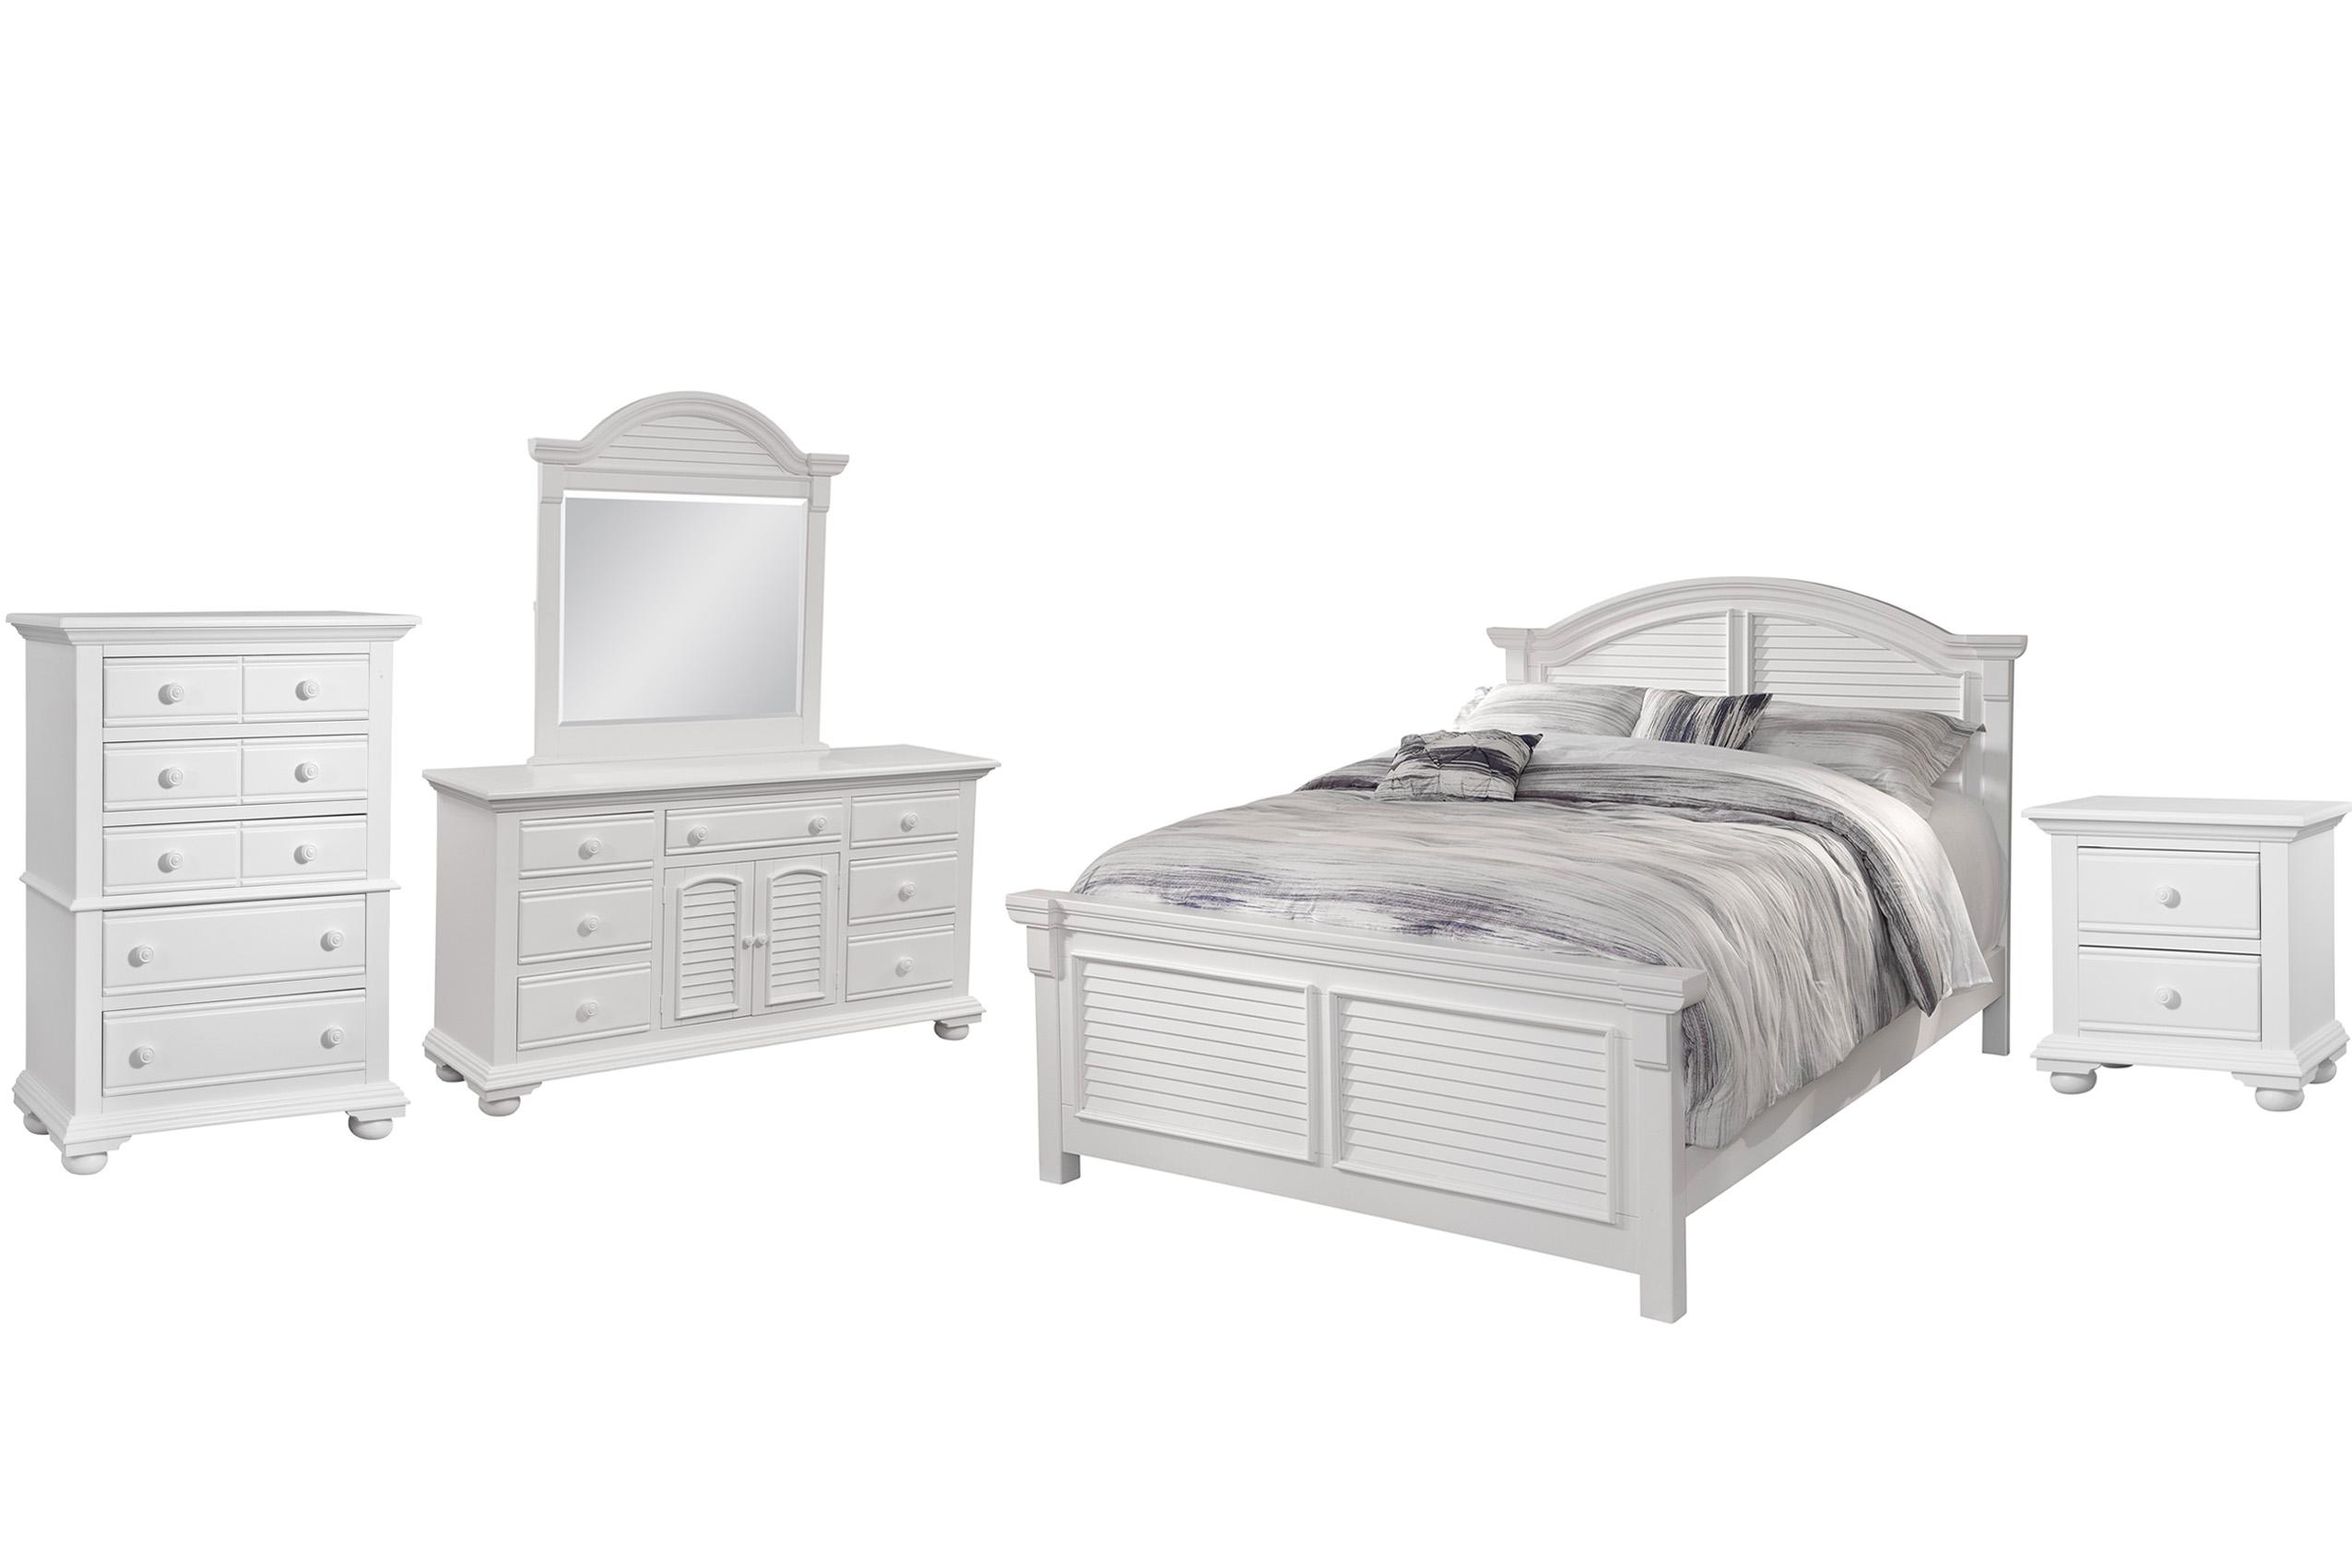 Classic, Traditional, Cottage Panel Bedroom Set COTTAGE 6510-50PAN 6510-QARPN-5PC-Small Way in White 